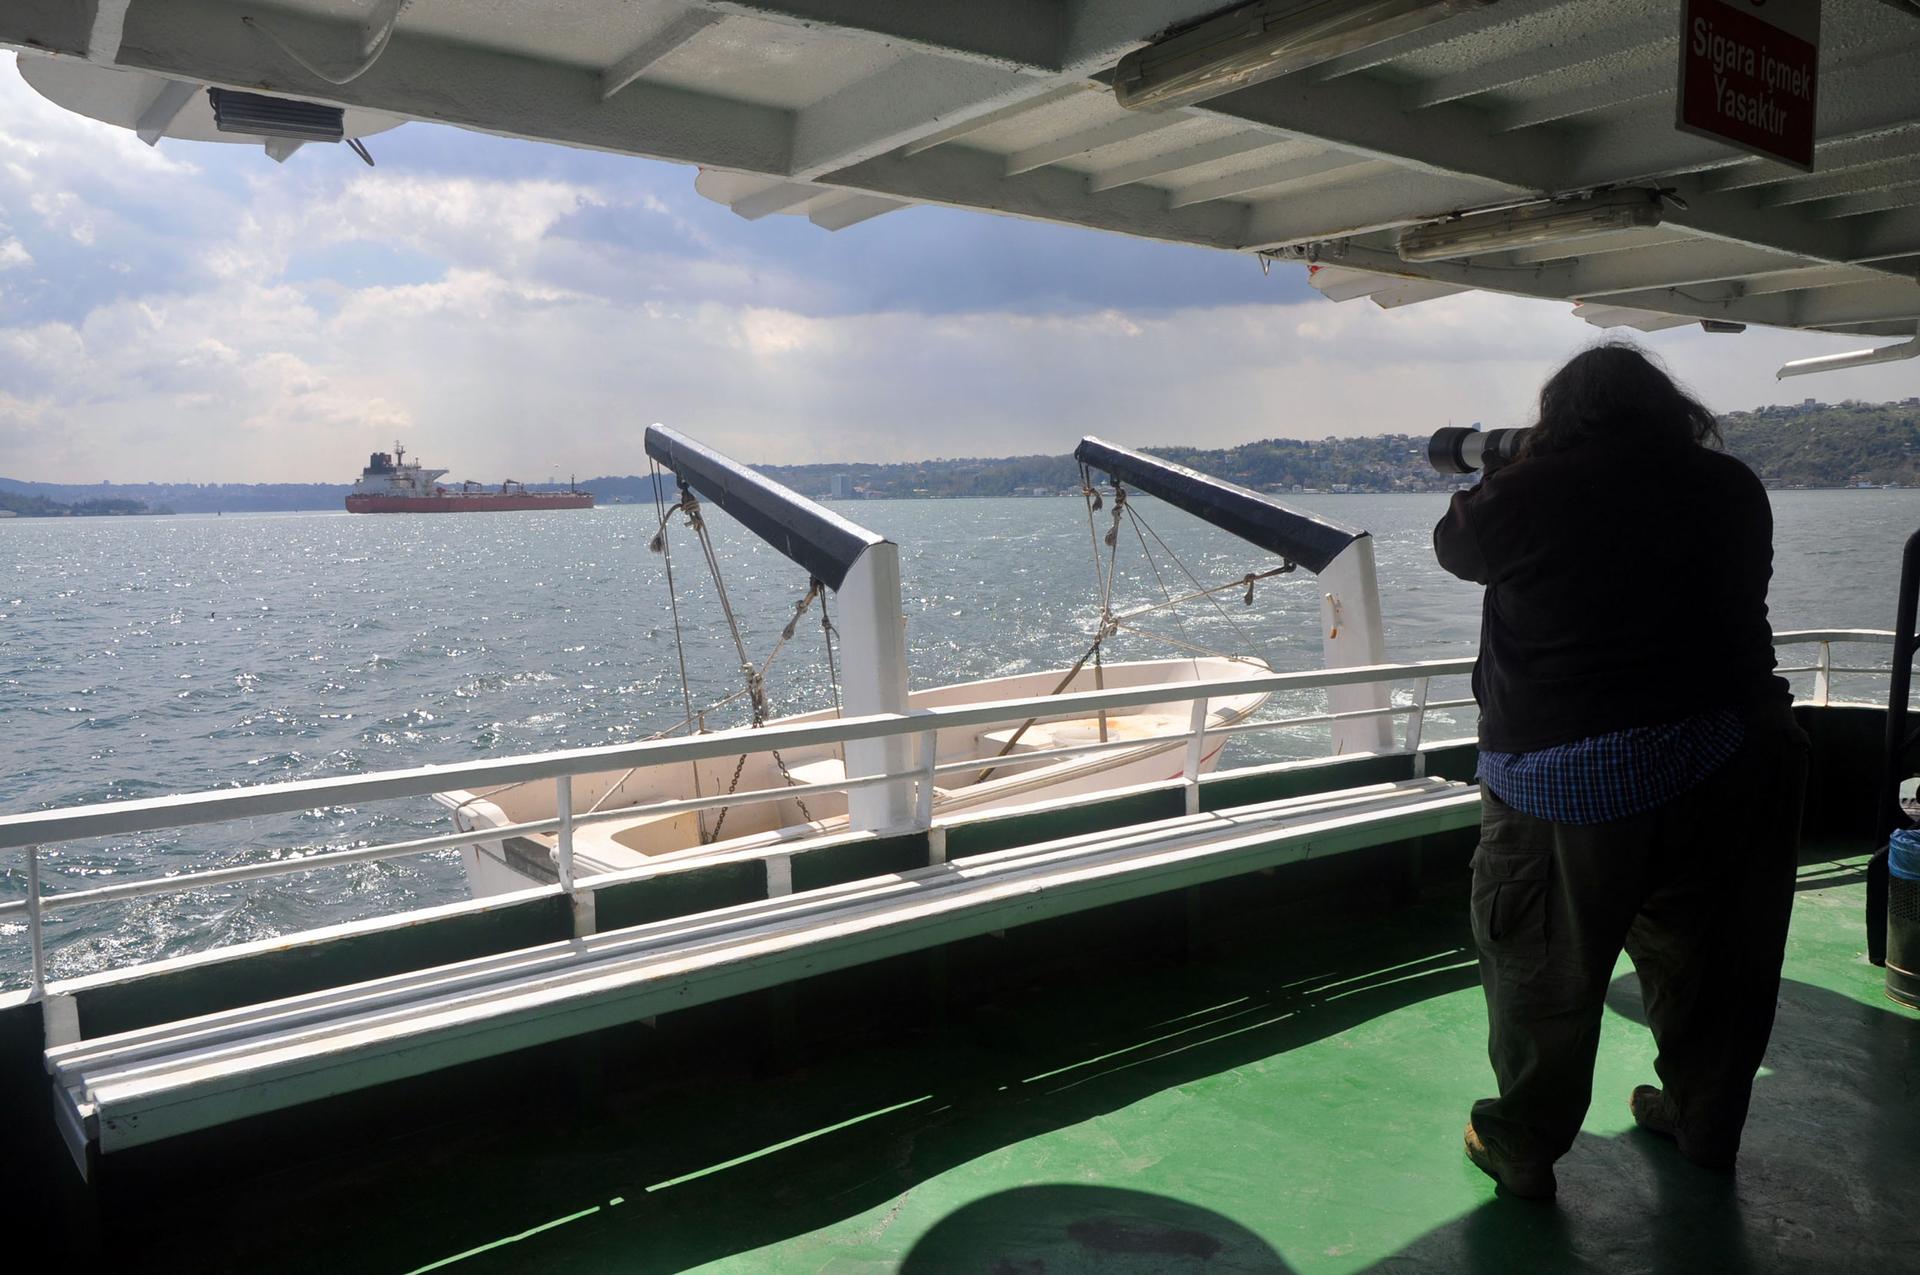 Yörük Işık, an independent Istanbul-based geopolitical analyst, is among a small group of ship watchers —  some hobbyists, some professionals — who observe ship traffic in Turkey’s Bosphorus Strait. 